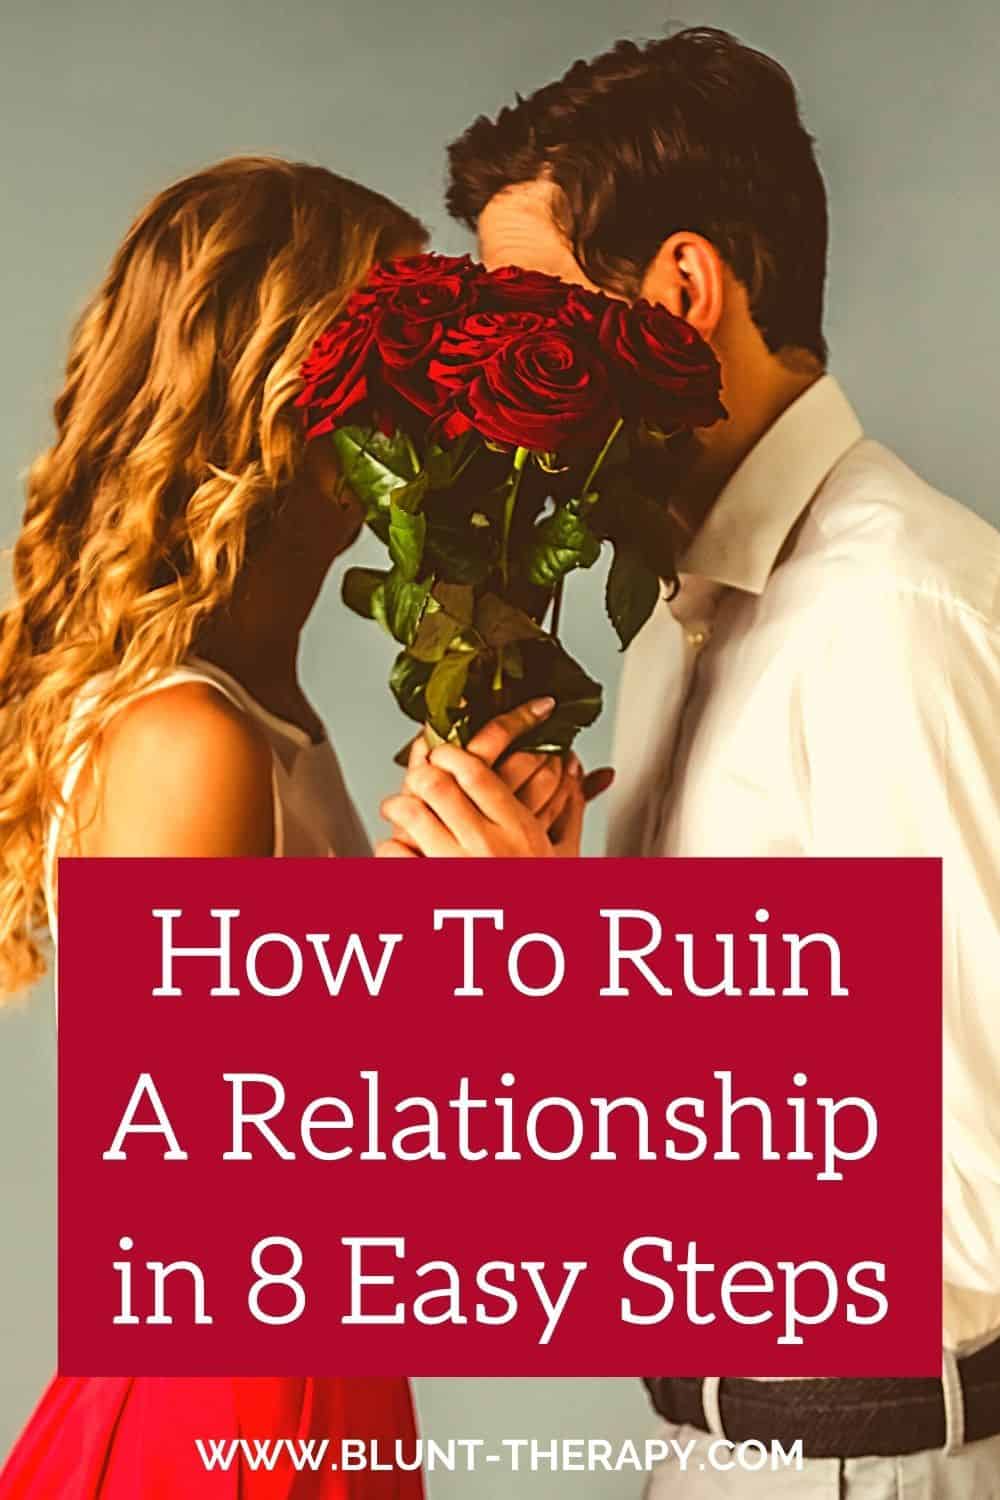 How To Ruin A Relationship In 8 Easy Steps